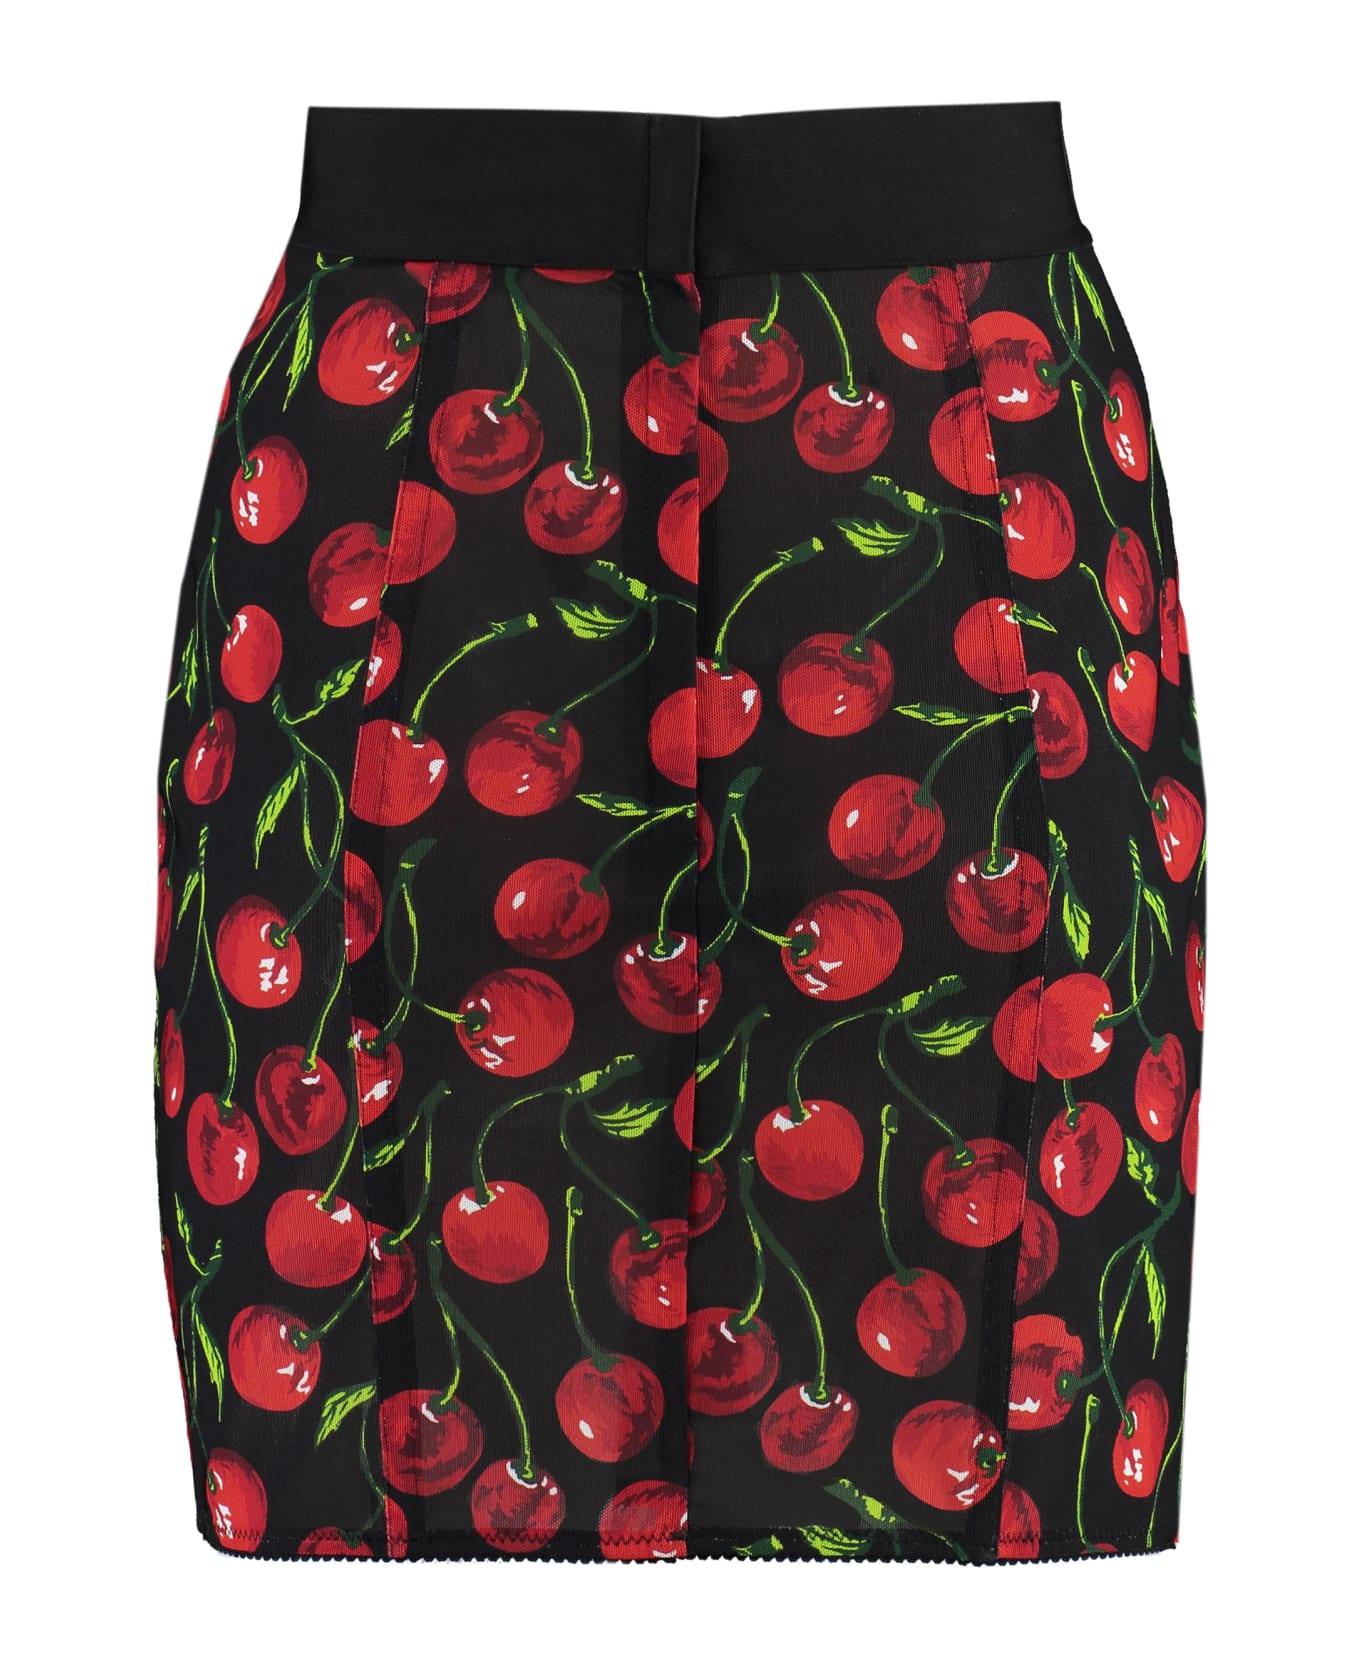 Dolce & Gabbana Mini-skirt With All-over Cherry Print - Multicolor スカート